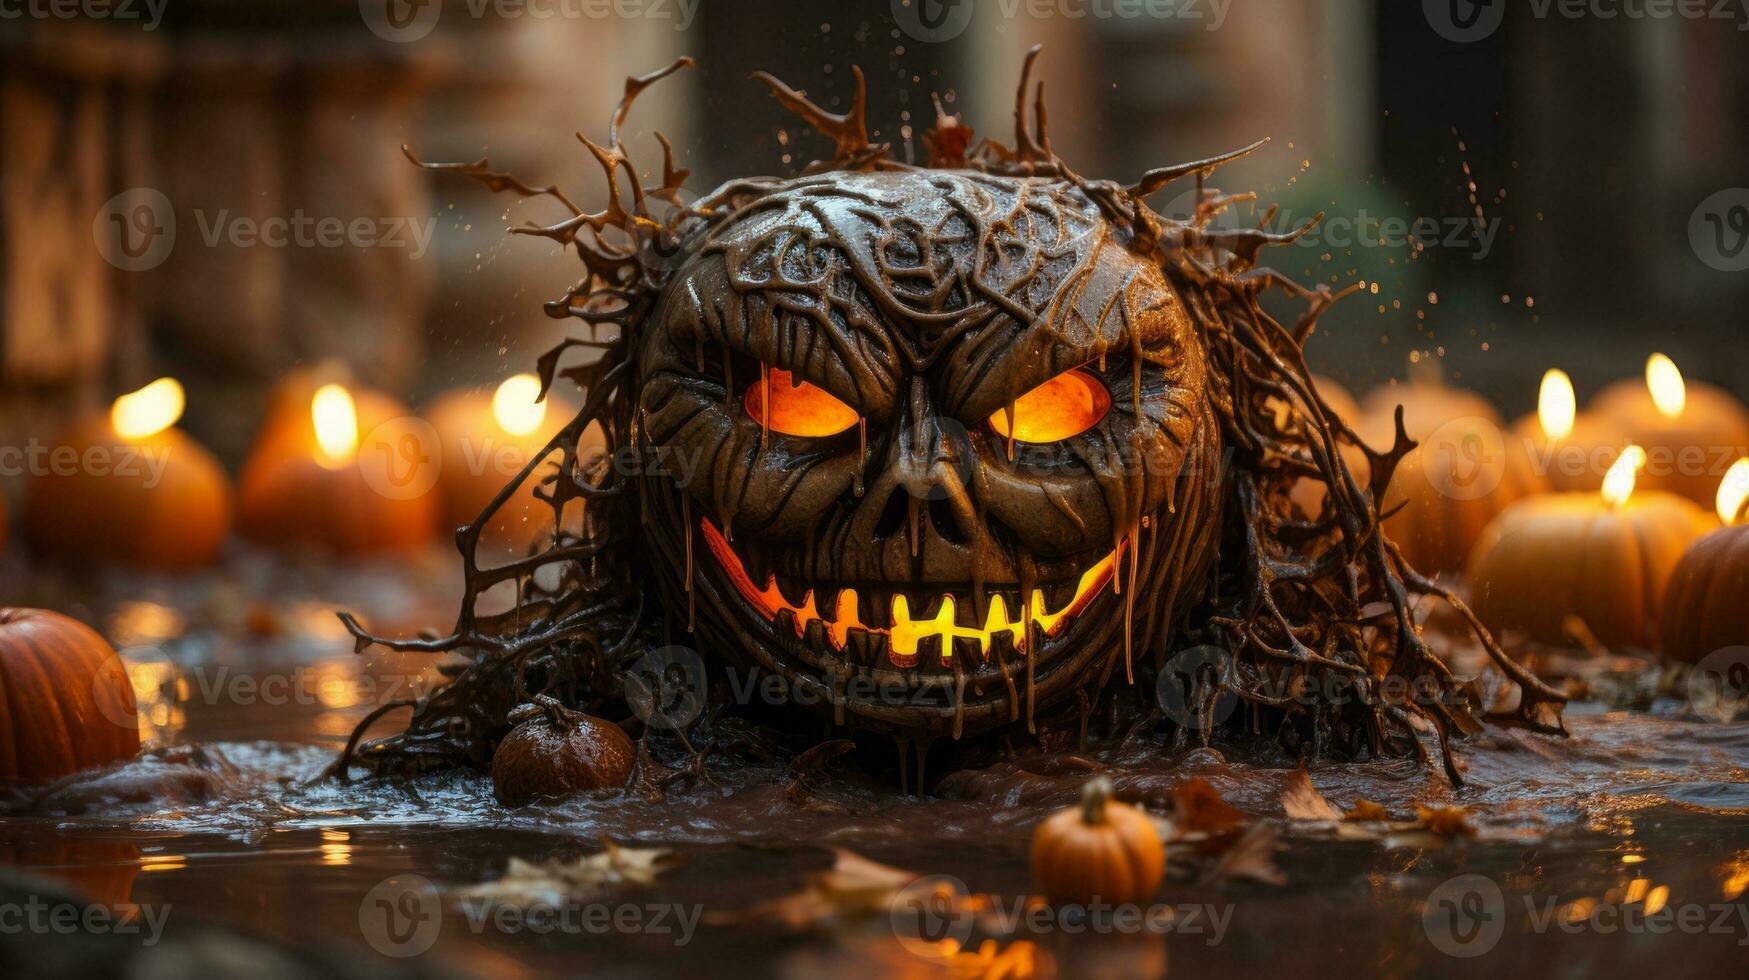 On halloween night, a candle illuminates a spooky pumpkin with a carved face, creating an eerie atmosphere perfect for the season, AI Generative photo